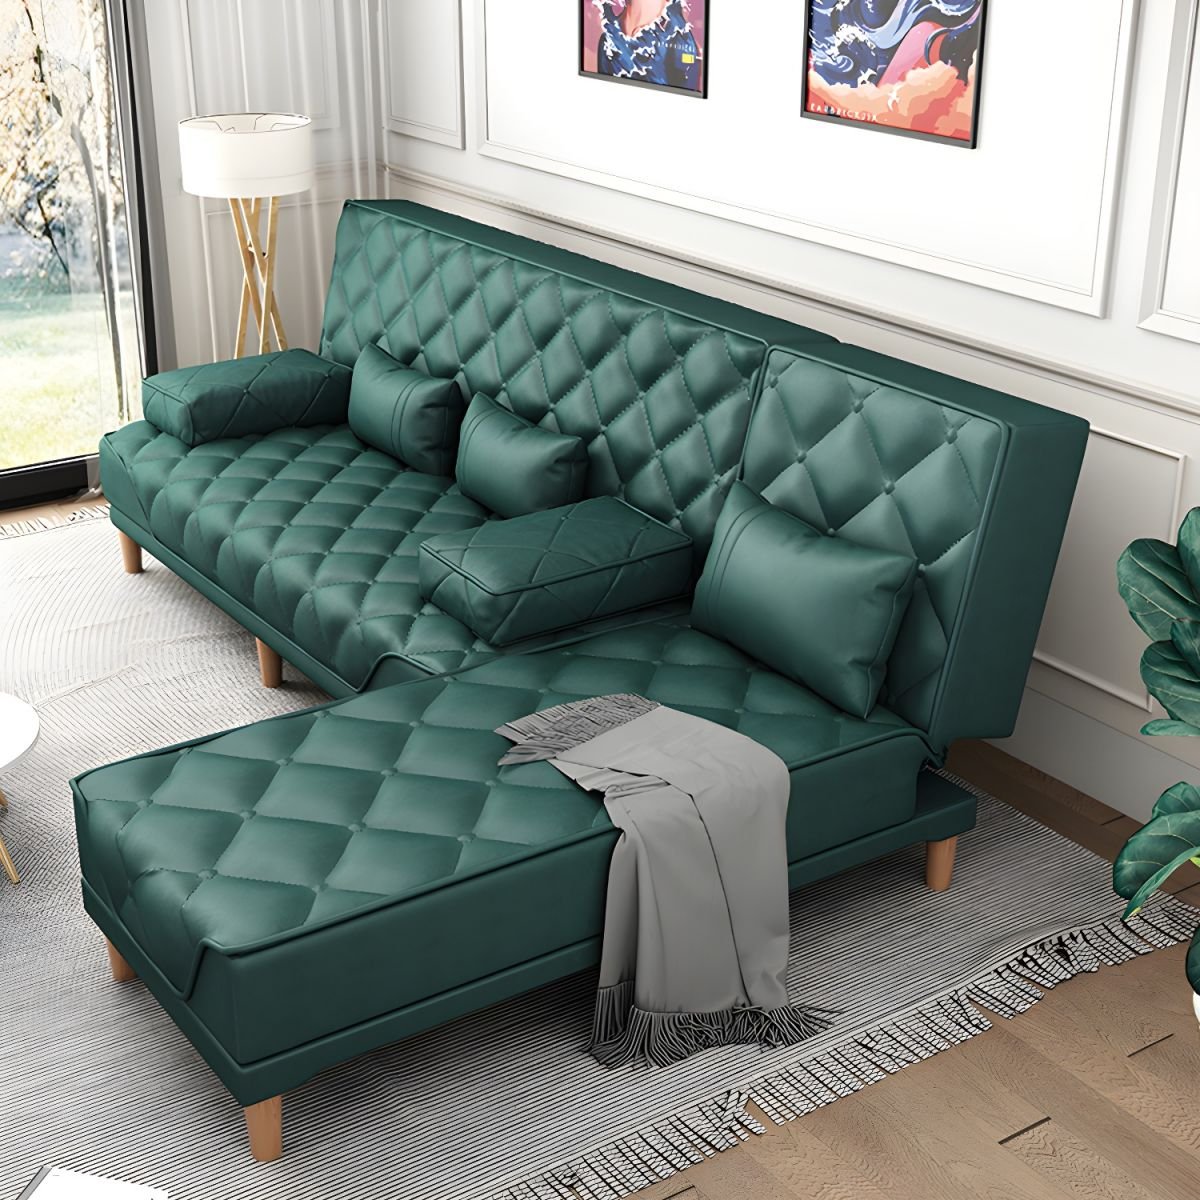 Contemporary Tight Back Convertible Sofa and Chaise with Pillow Top Arm - 73"L x 57"W x 34"H Blackish Green Tech Cloth